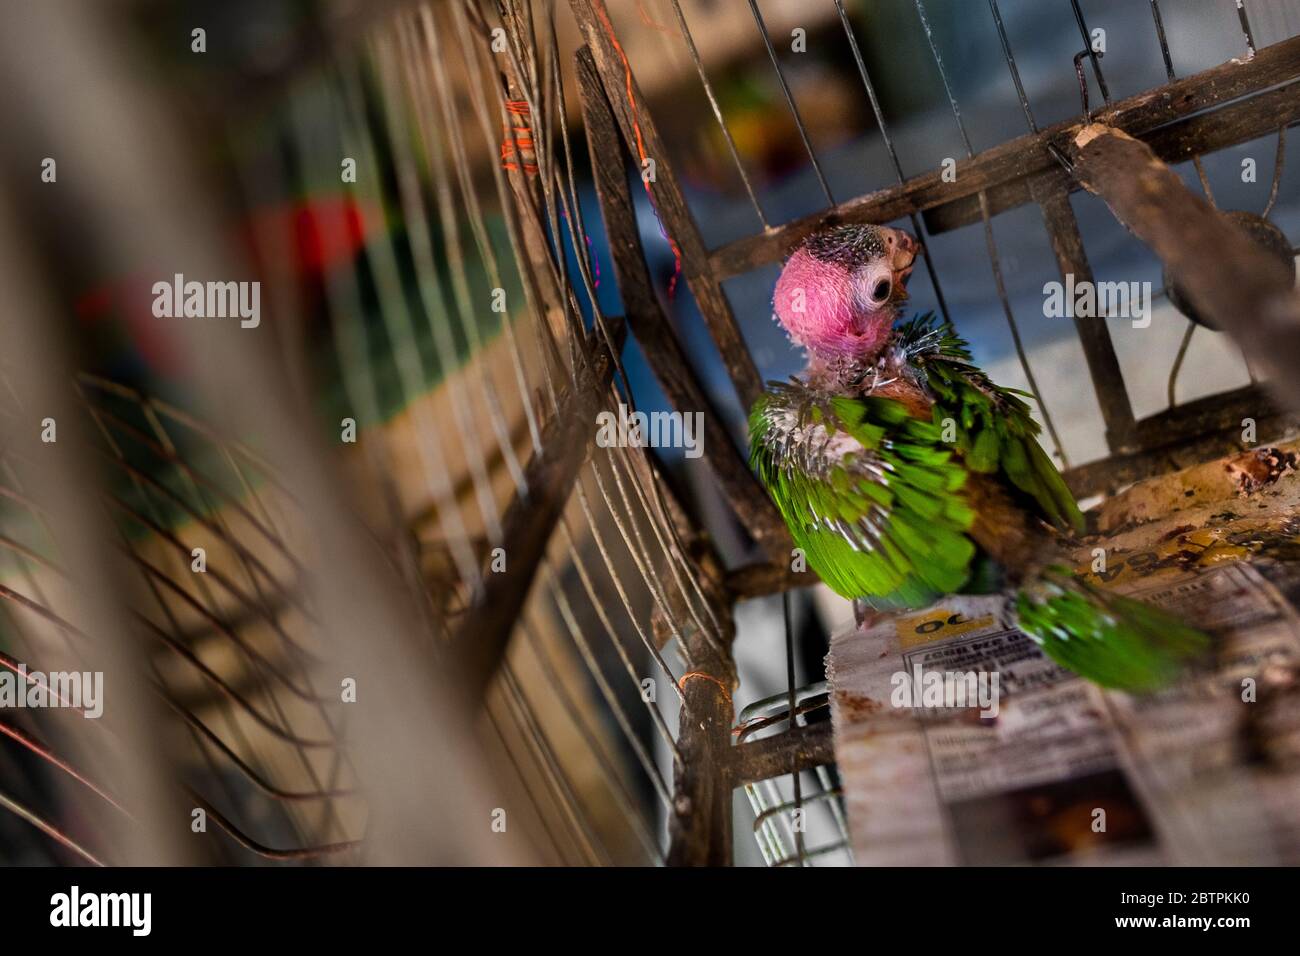 A pet bird (an Amazon parrot), affected by severe feather loss, is seen inside a birdcage in the bird market in Cartagena, Colombia. Stock Photo